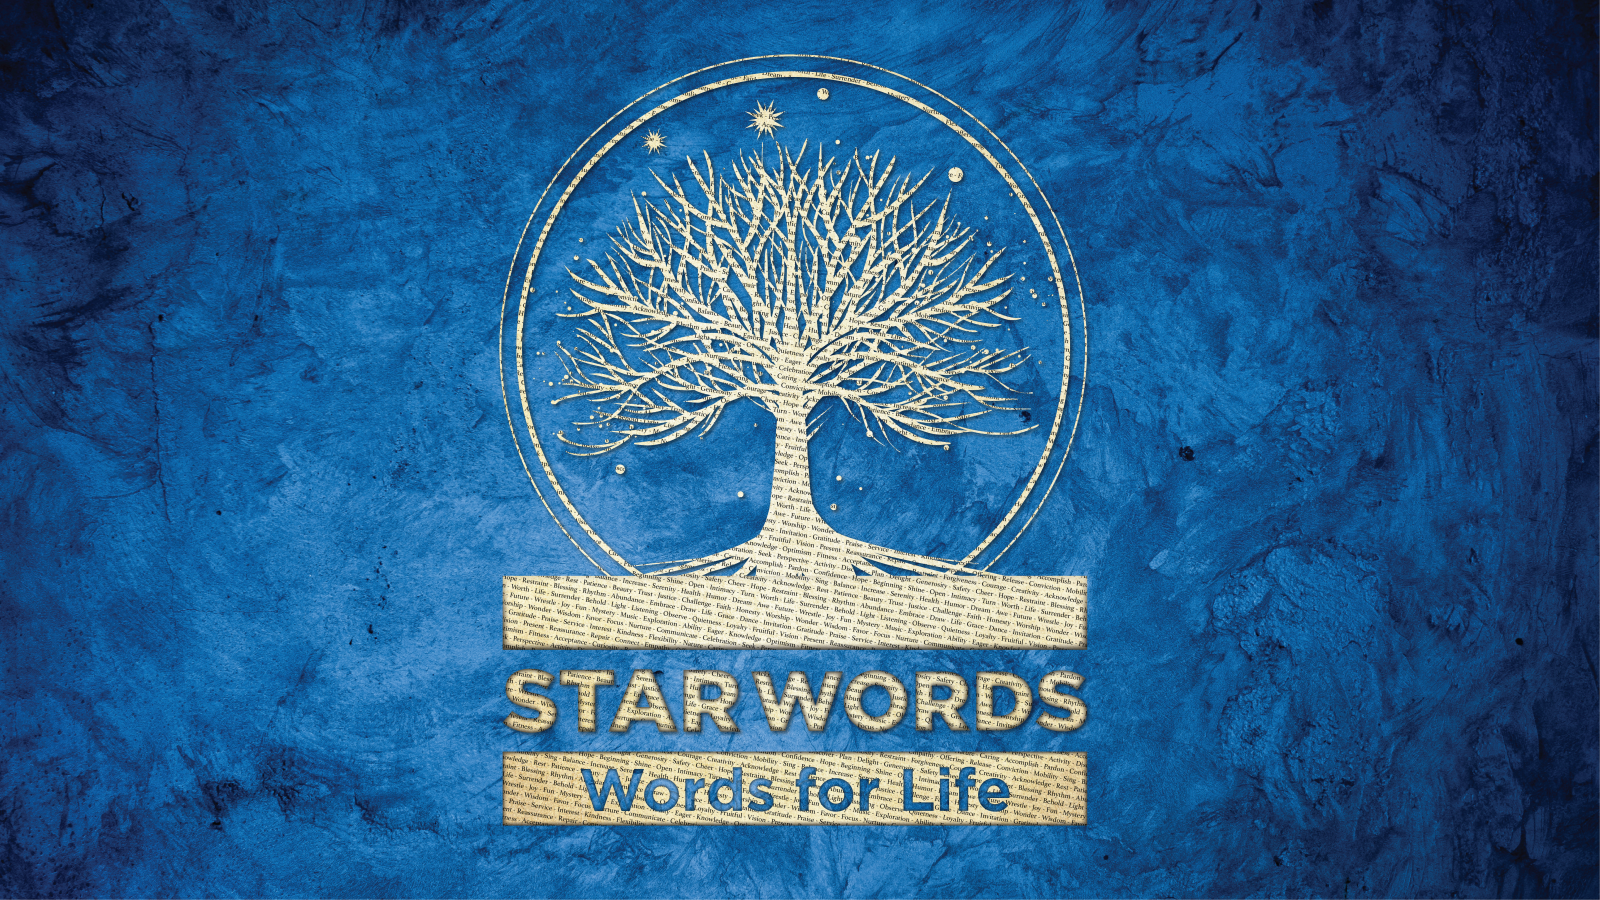 Star Words: Words for Life